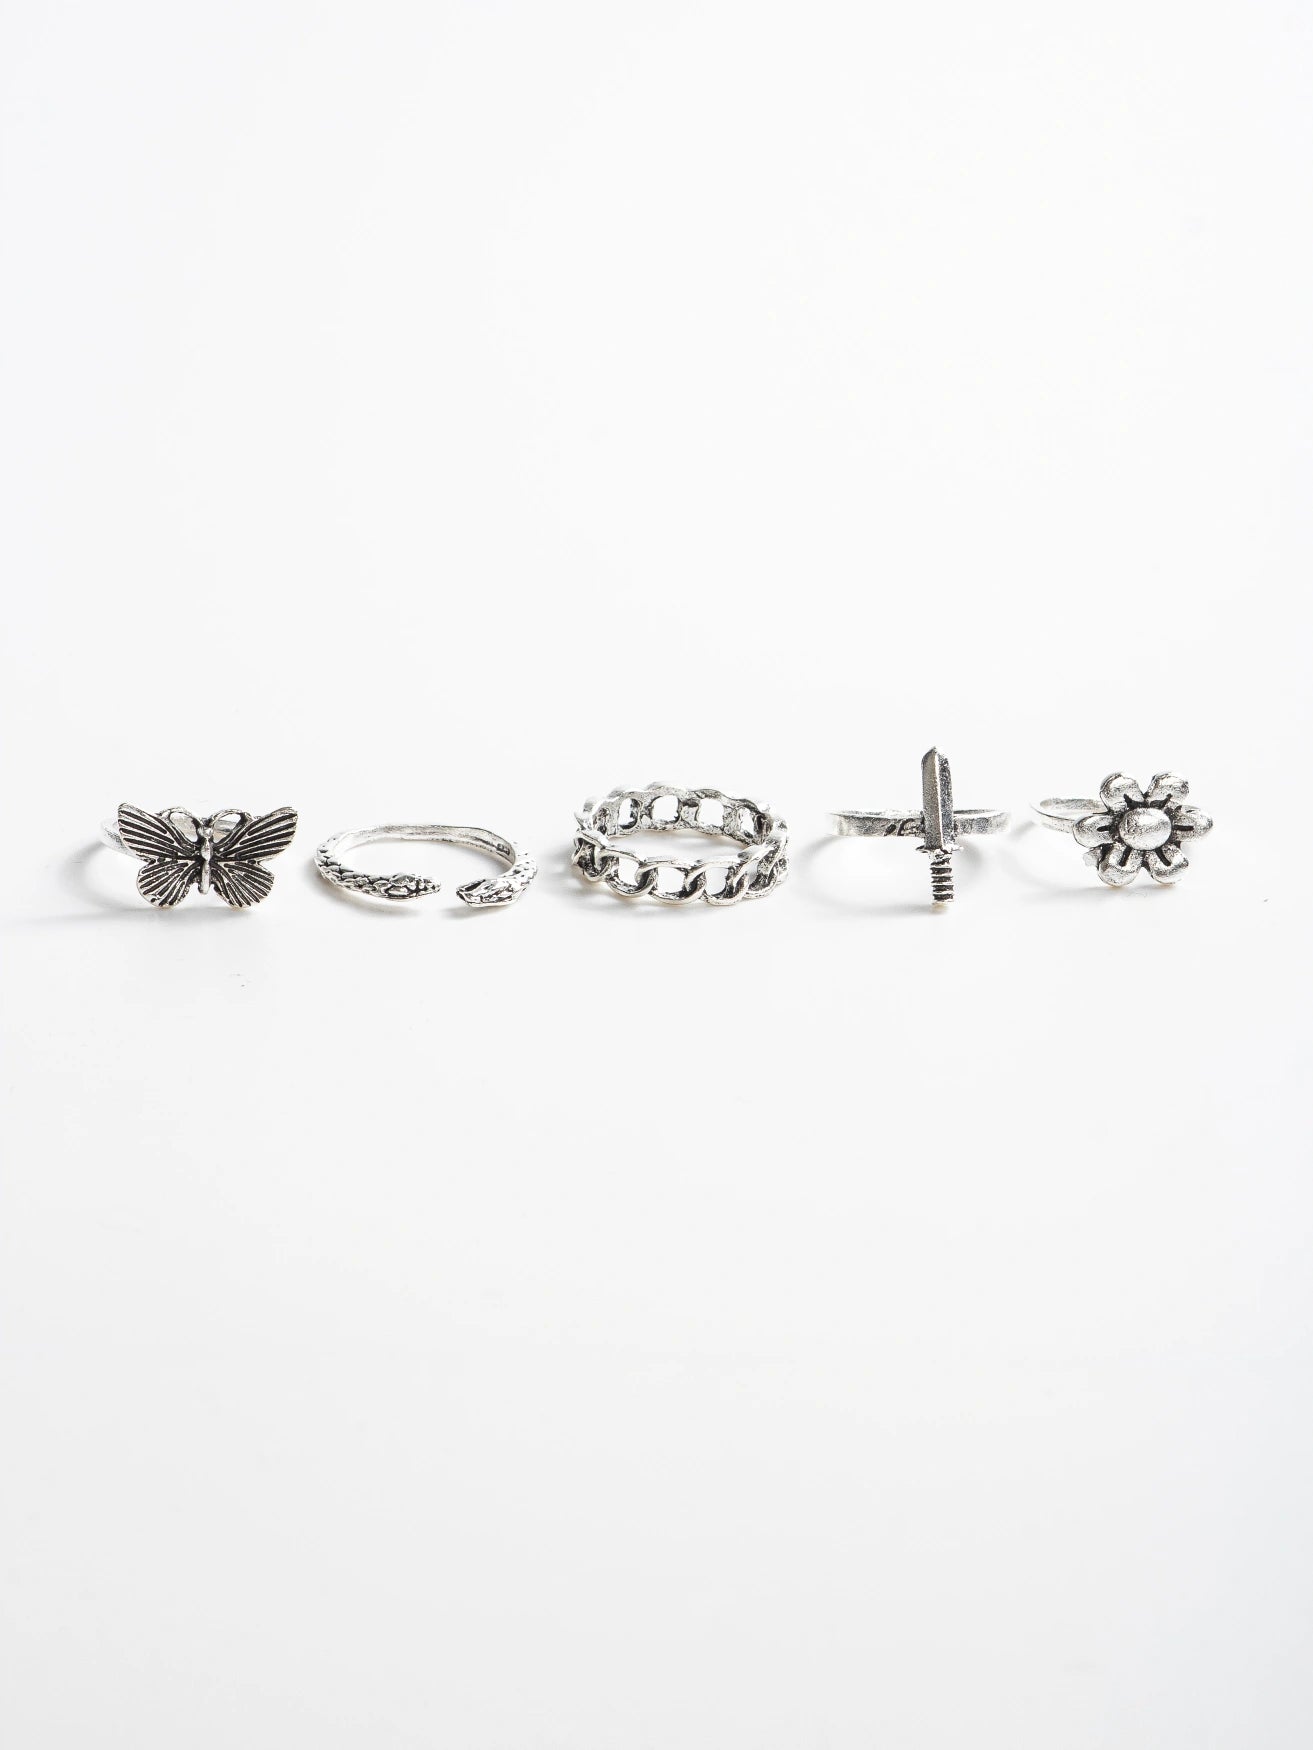 5 Pieces Oxidised Ring Set for Men and Women